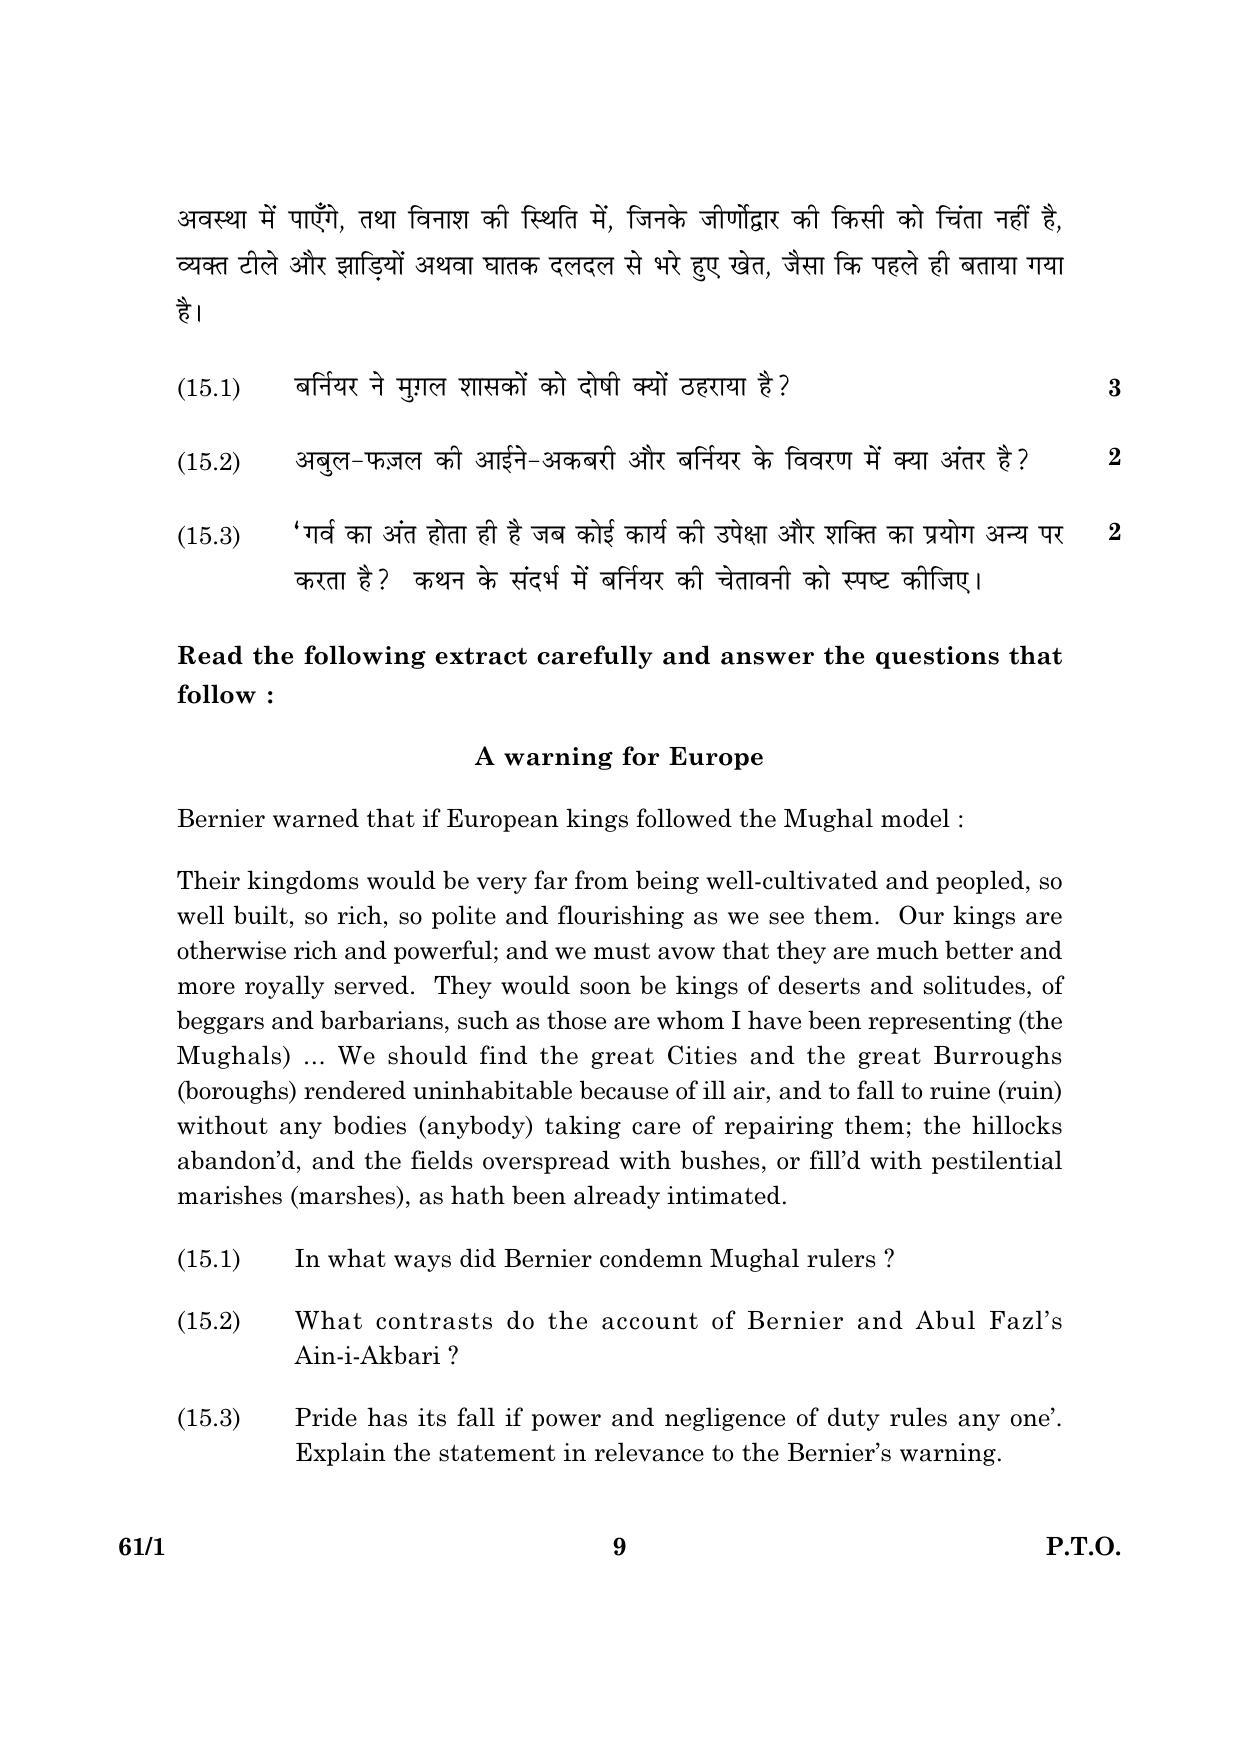 CBSE Class 12 061 Set 1 History 2016 Question Paper - Page 9